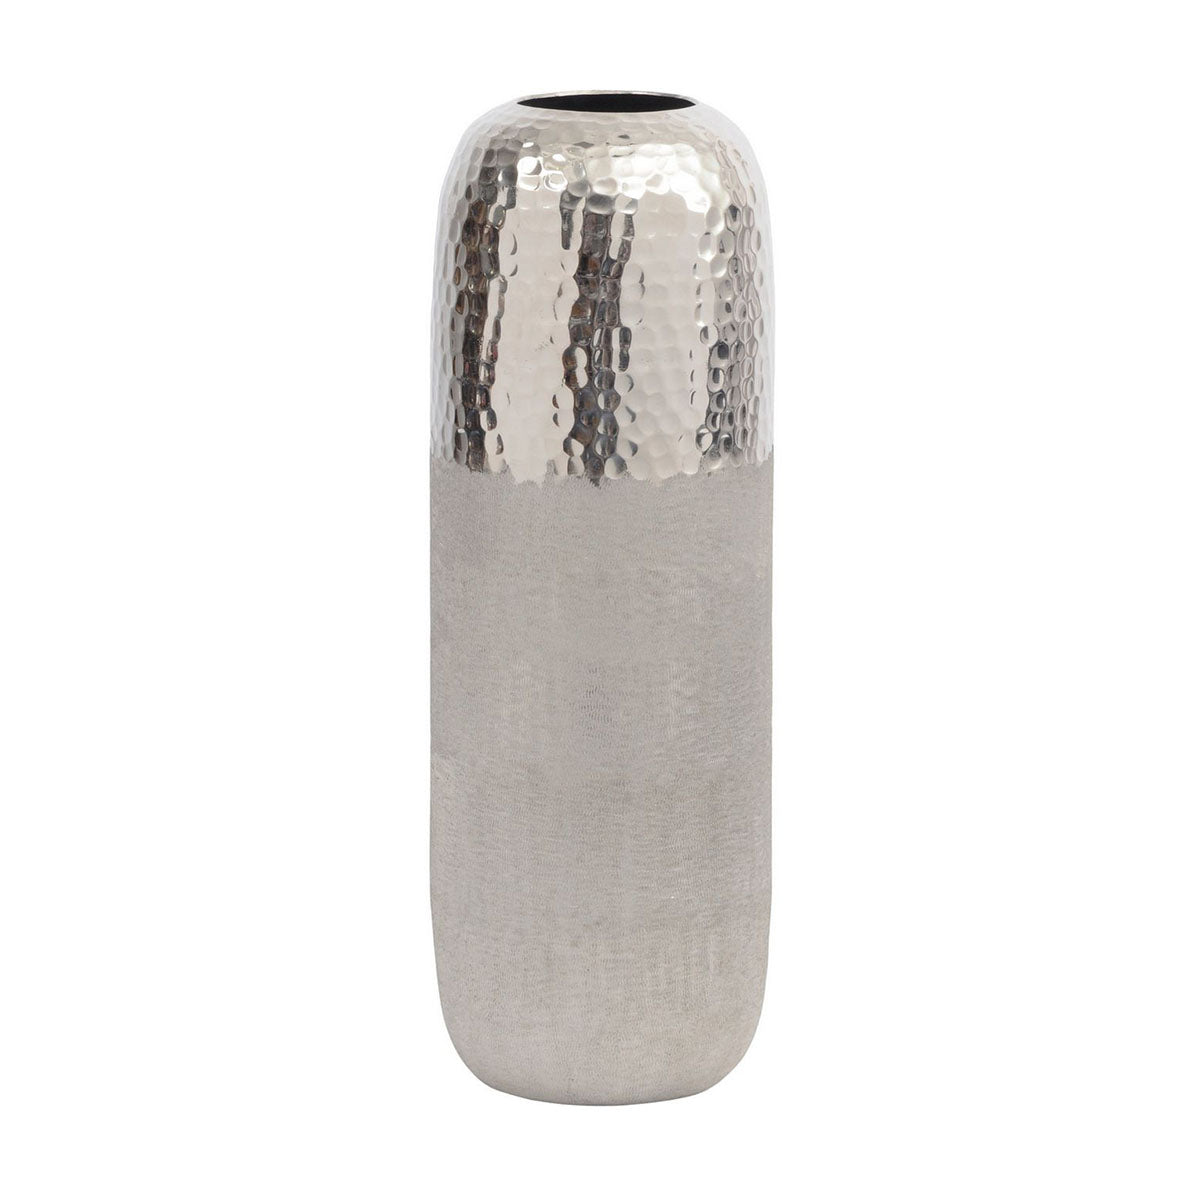 Fuse Hammered and Brushed Large Vase in Silver Finish